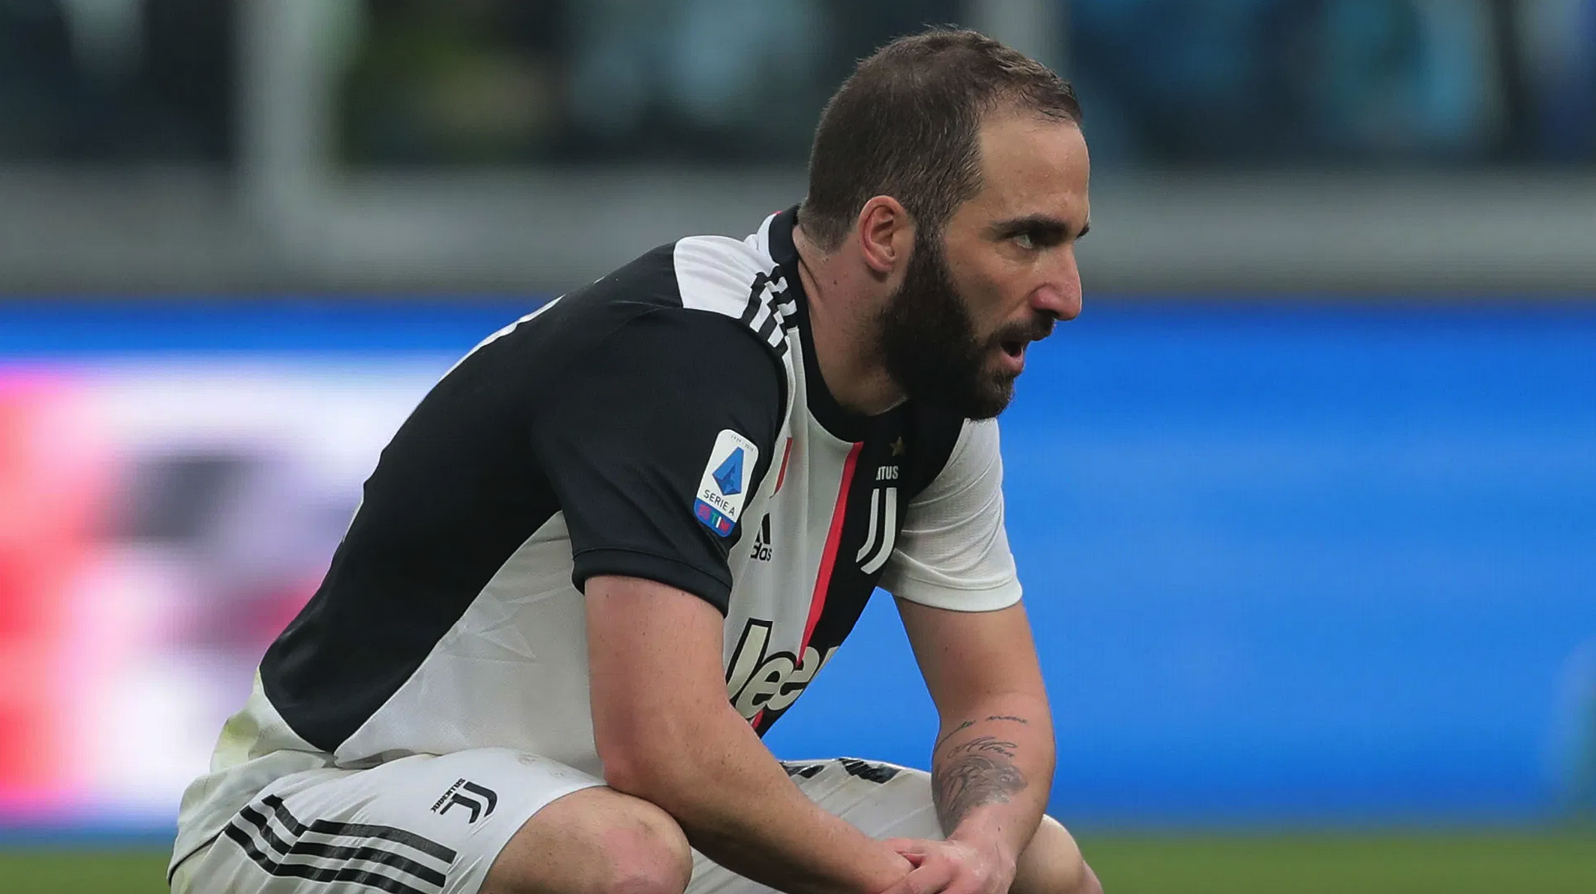 Gonzalo Higuain's latest seasons at Juventus were not as successful as the previous ones. At 32, Higuain is now bidding farewell to the Serie A to try his hand at the MLS